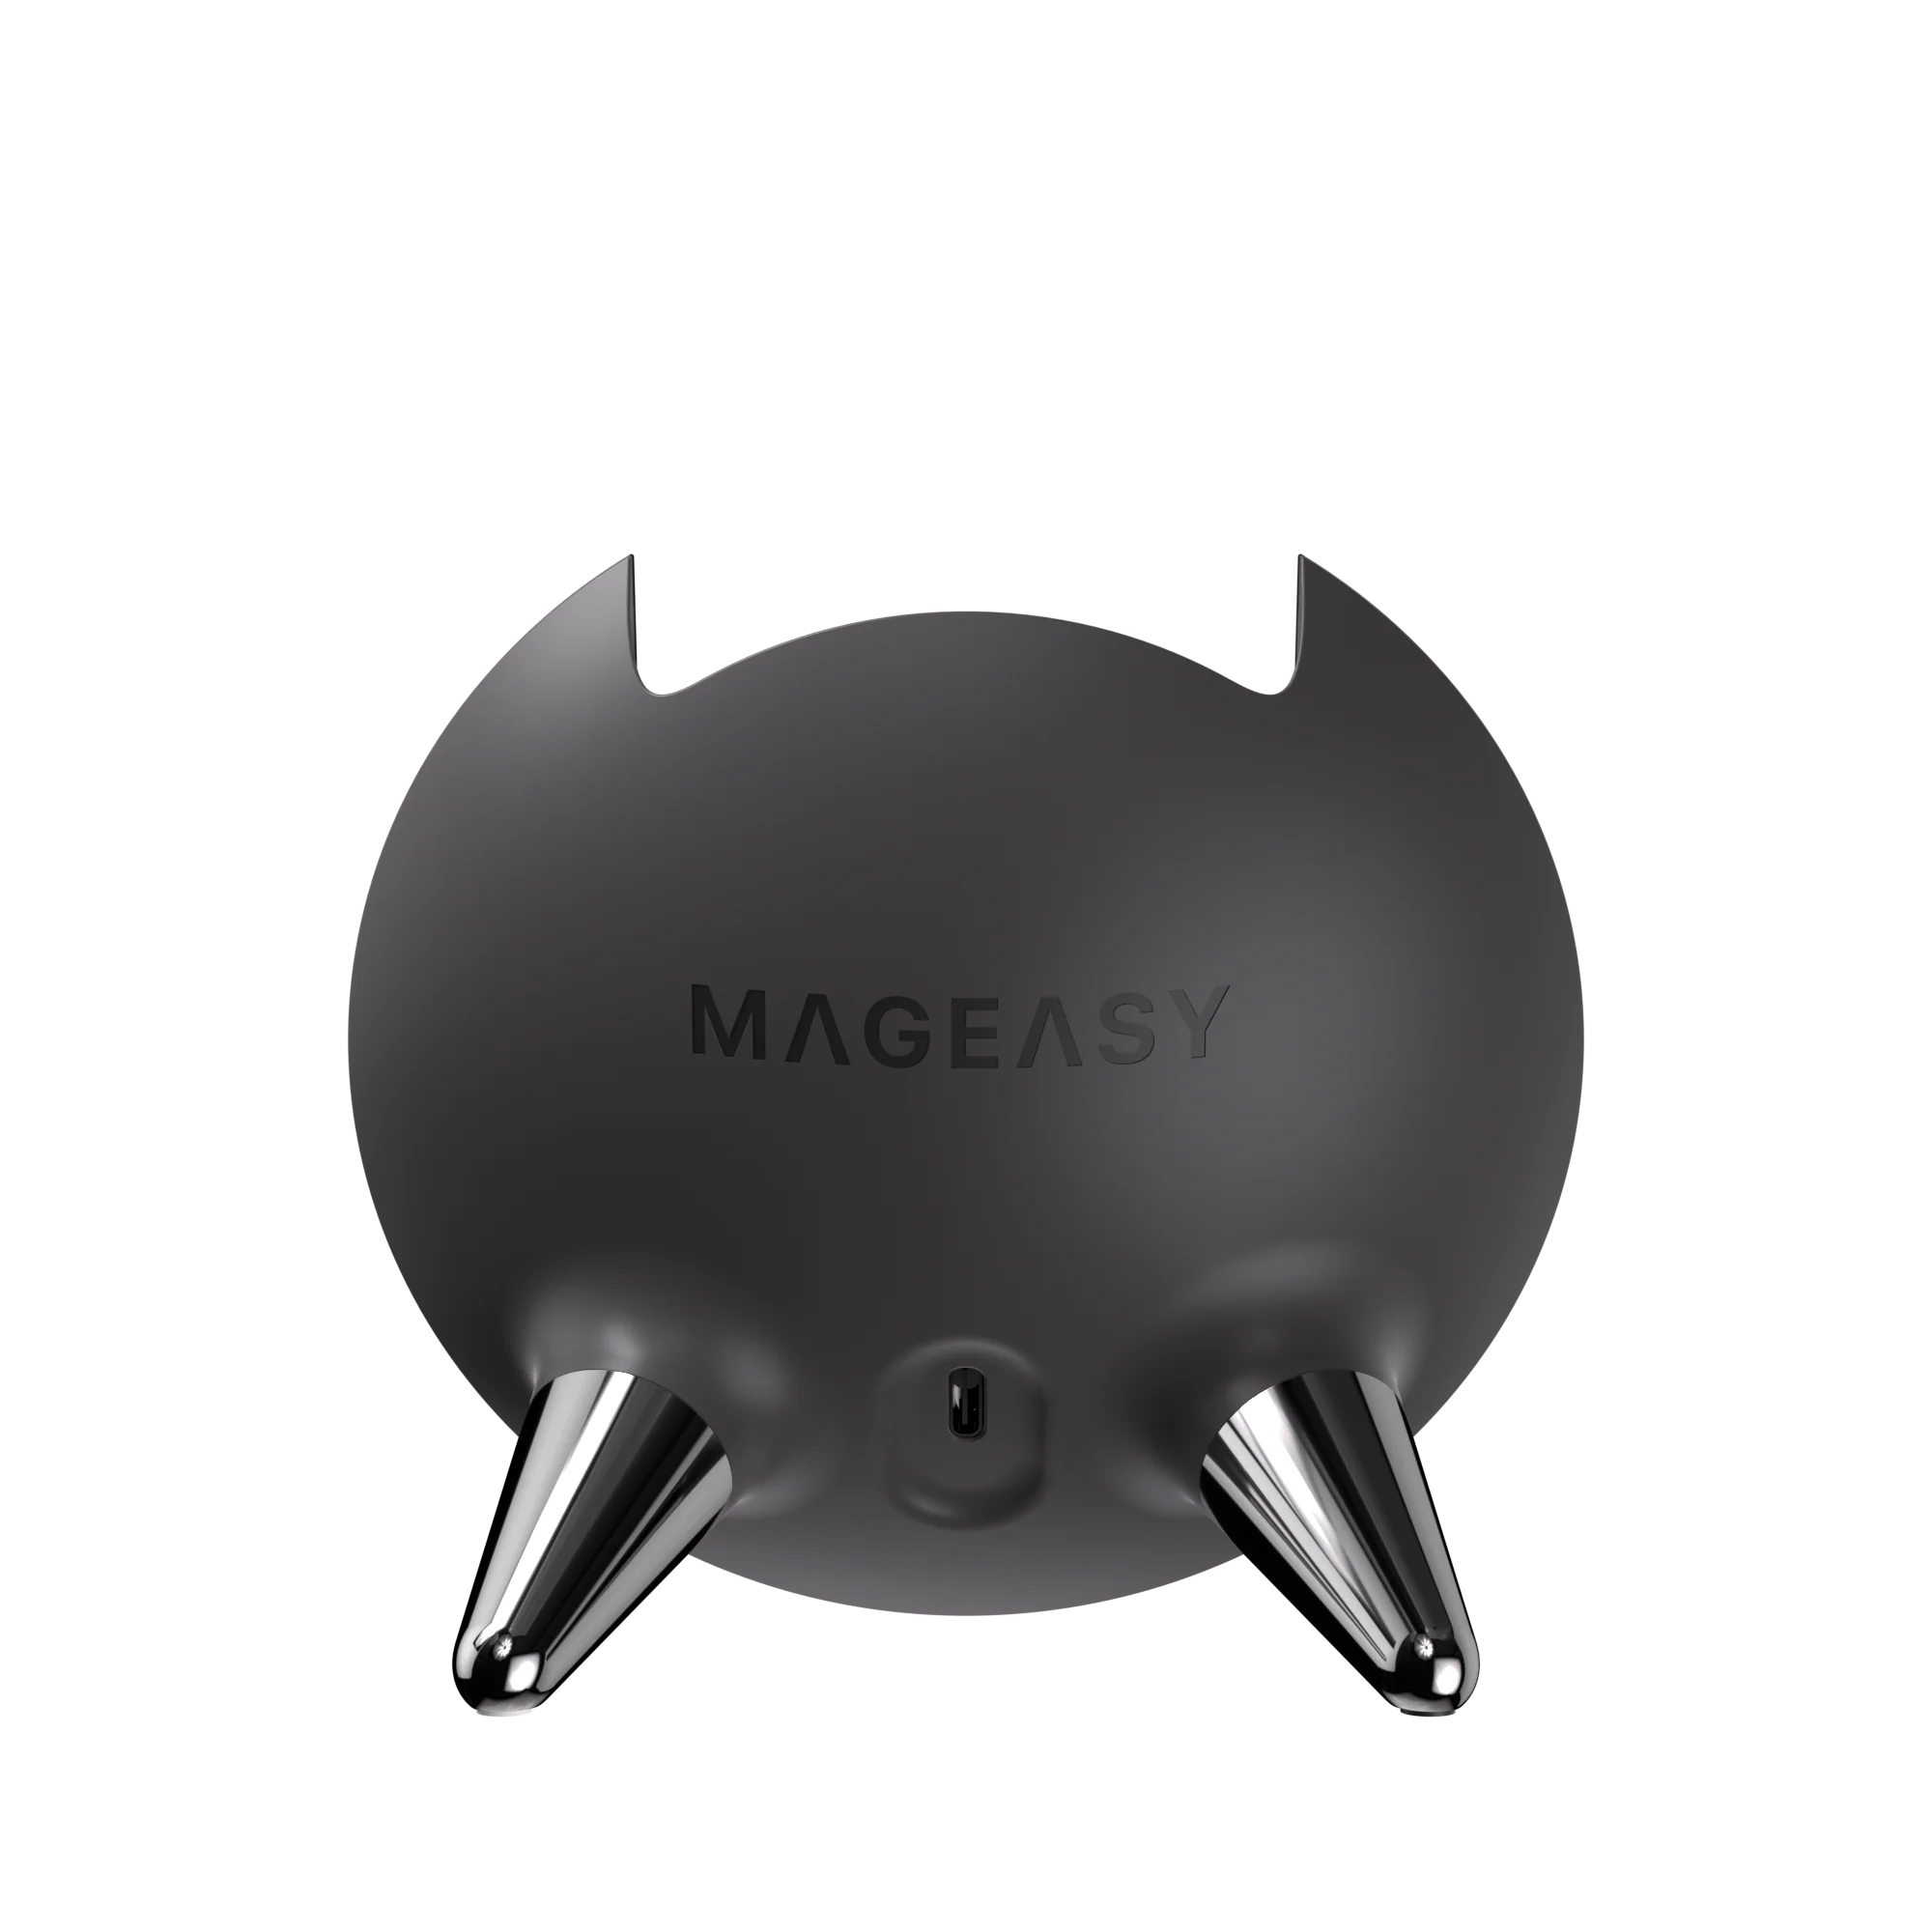 MagEasy Portal 2-in-1 5000mAh MagSafe Power Bank with Charging Stand for iPhone Seires with MagSafe / MagSafe Case, Black